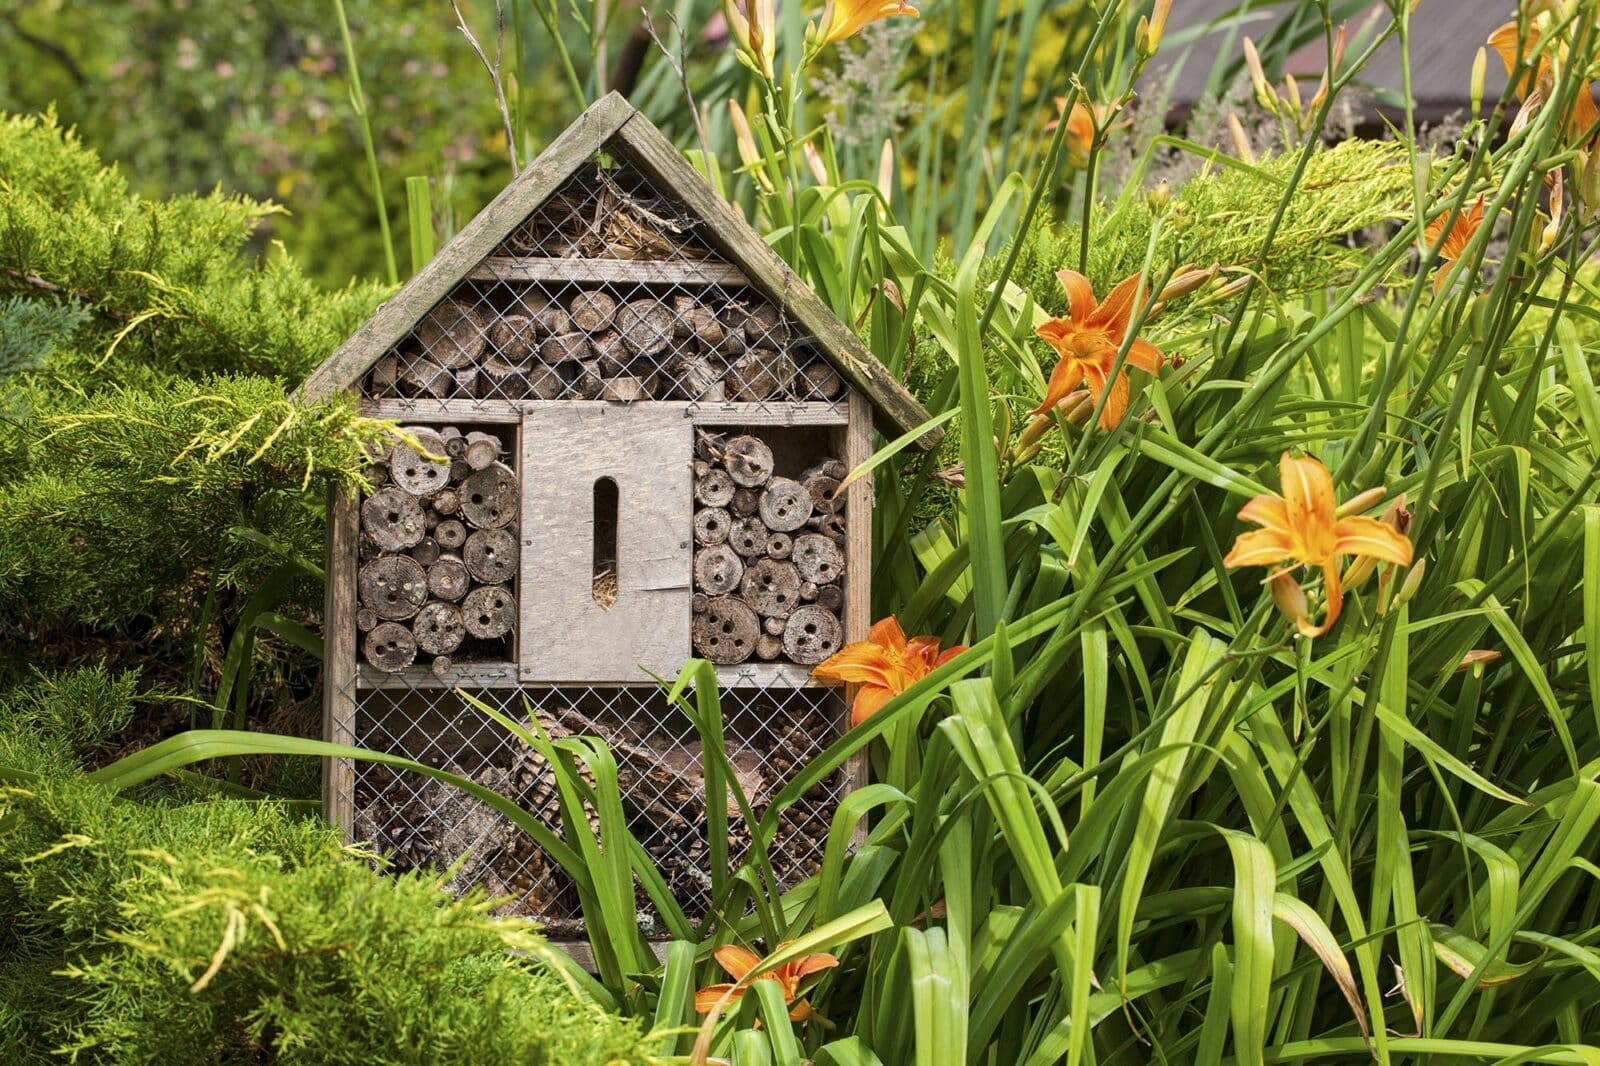 wildlife habitats, such as an insect hotel in a garden ensures the wildlife you attract will shelter and establish.